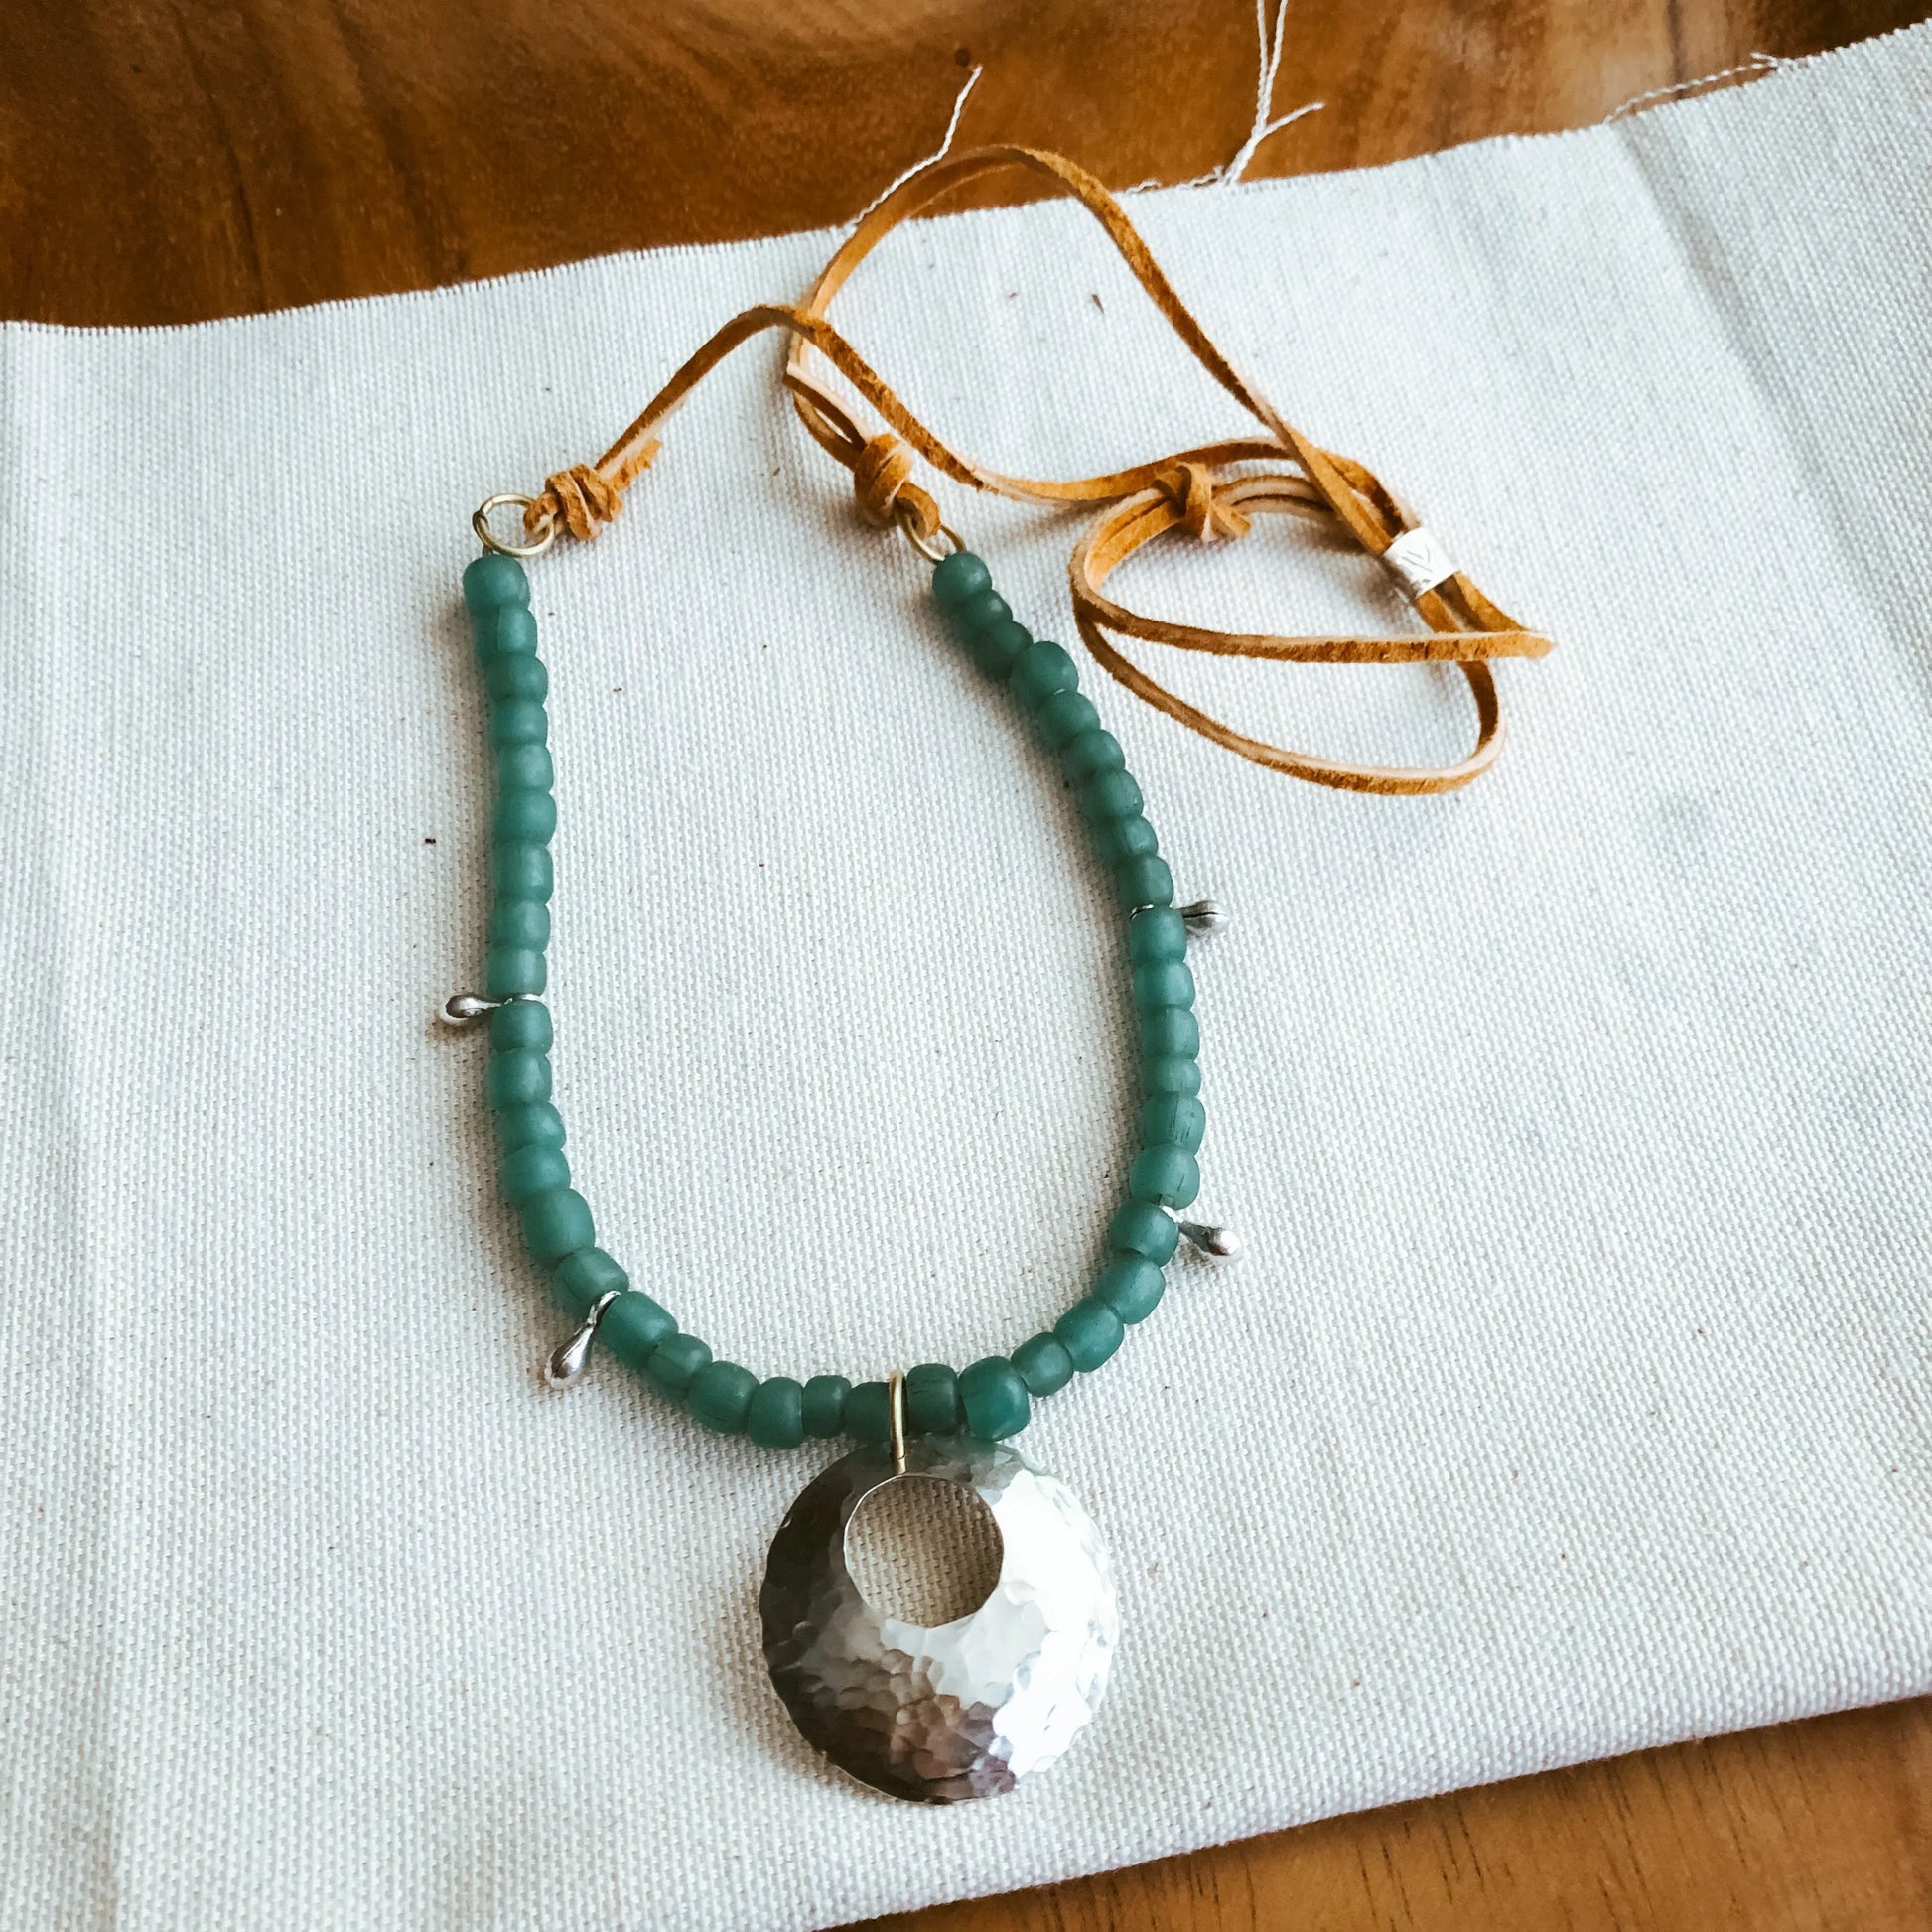 Full Moon Beaded Necklace - Teal Wind + The Wanderer, LLC